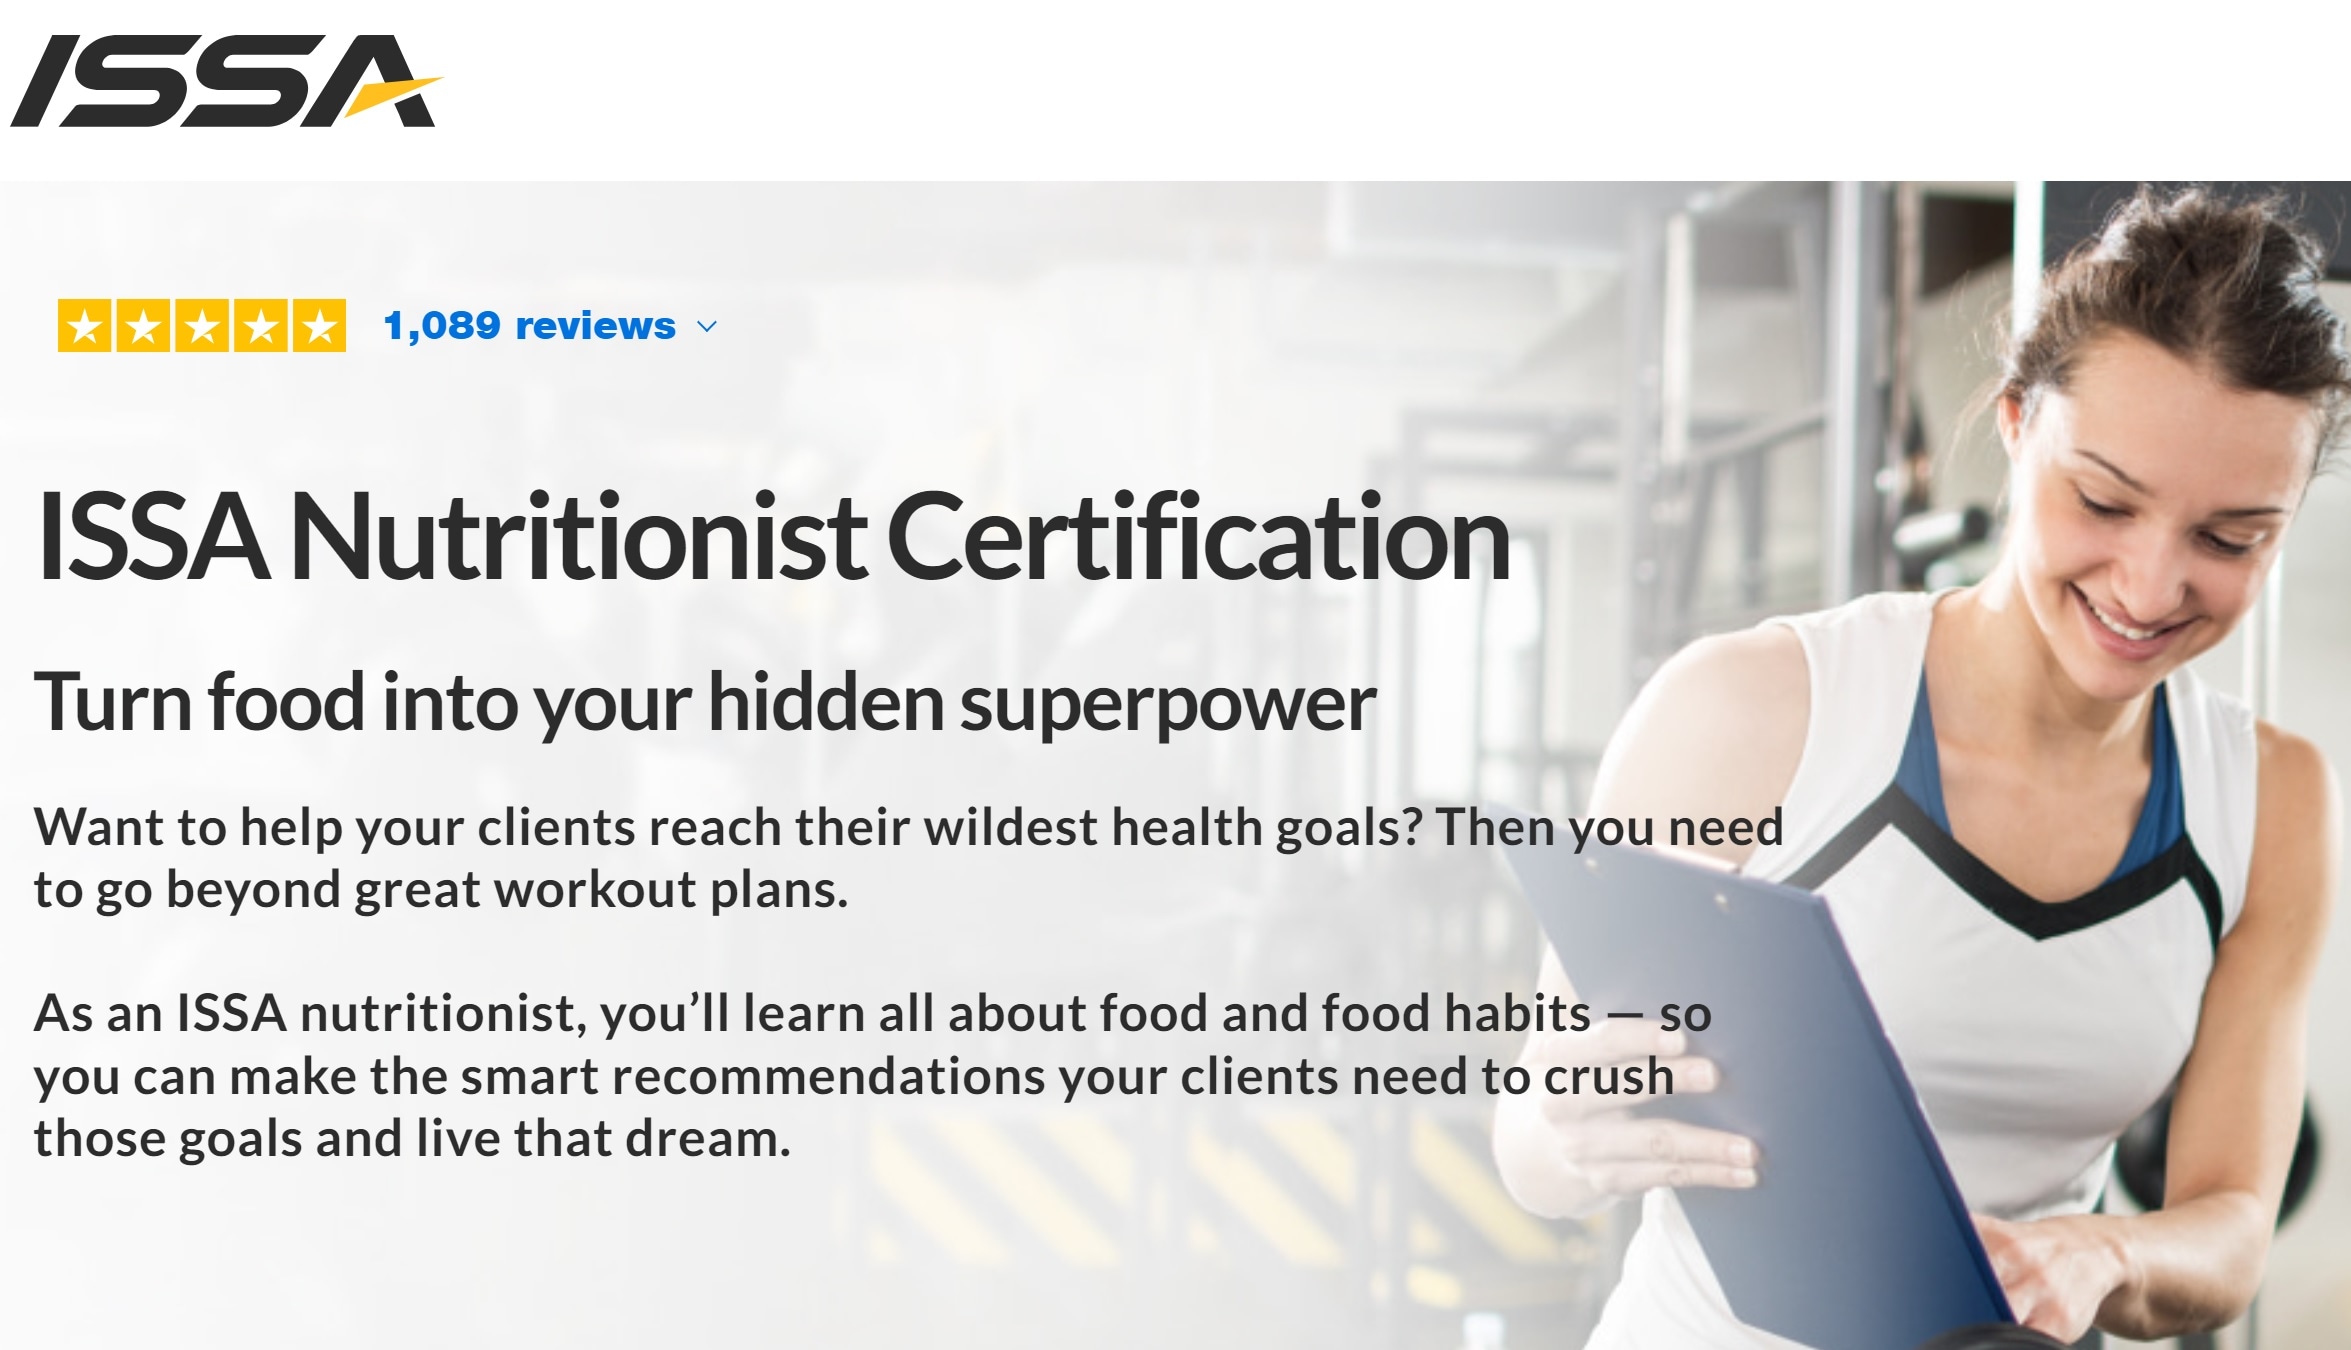 ISSA Nutritionist Certification Review